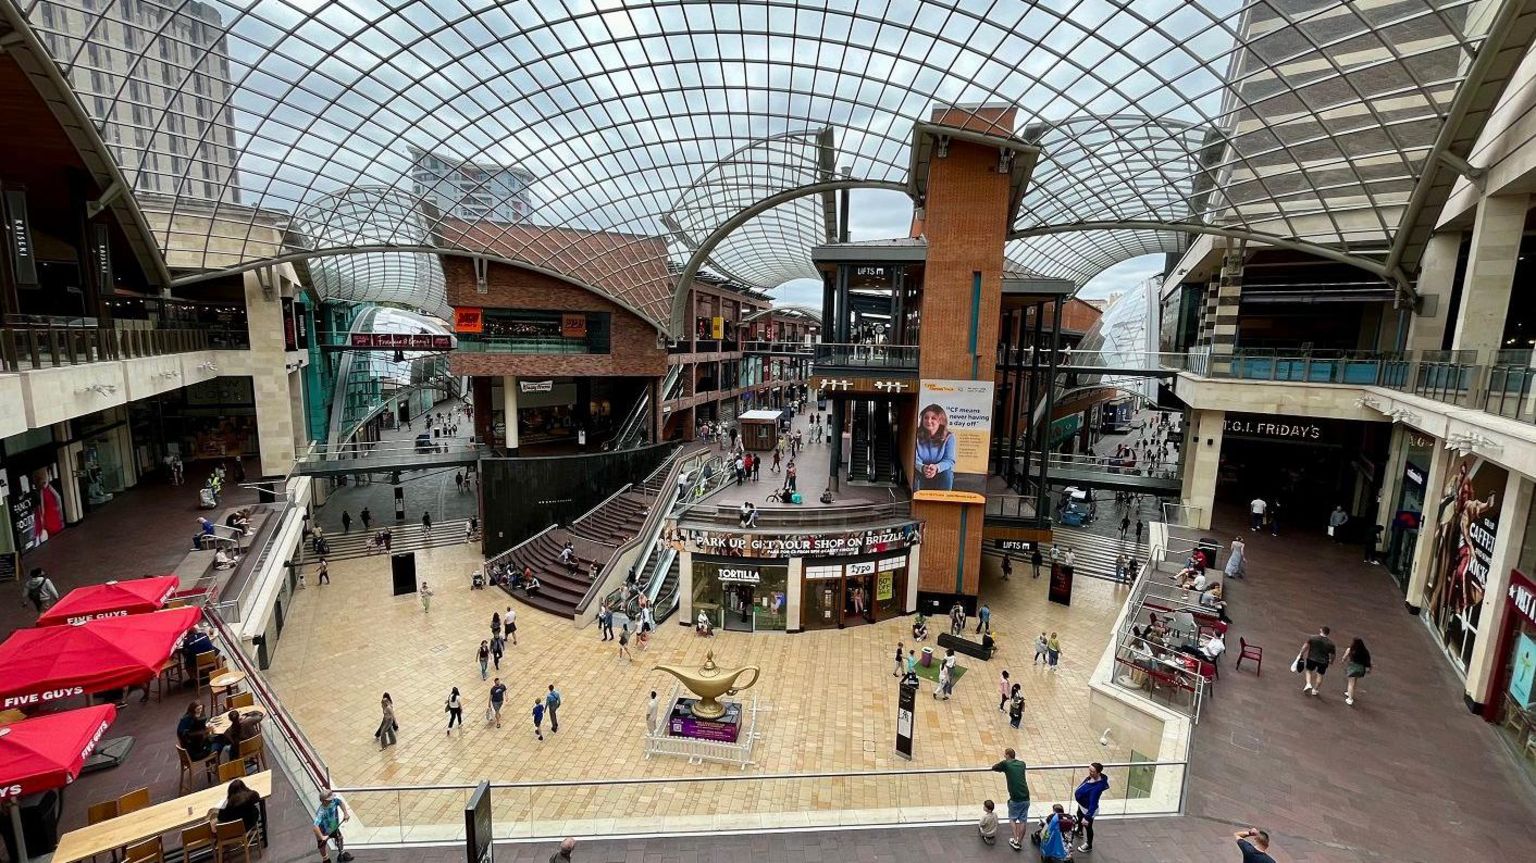 An interior image of Cabot Circus Shopping Centre in Bristol taken from the top floor showing escalators, shops and the roof